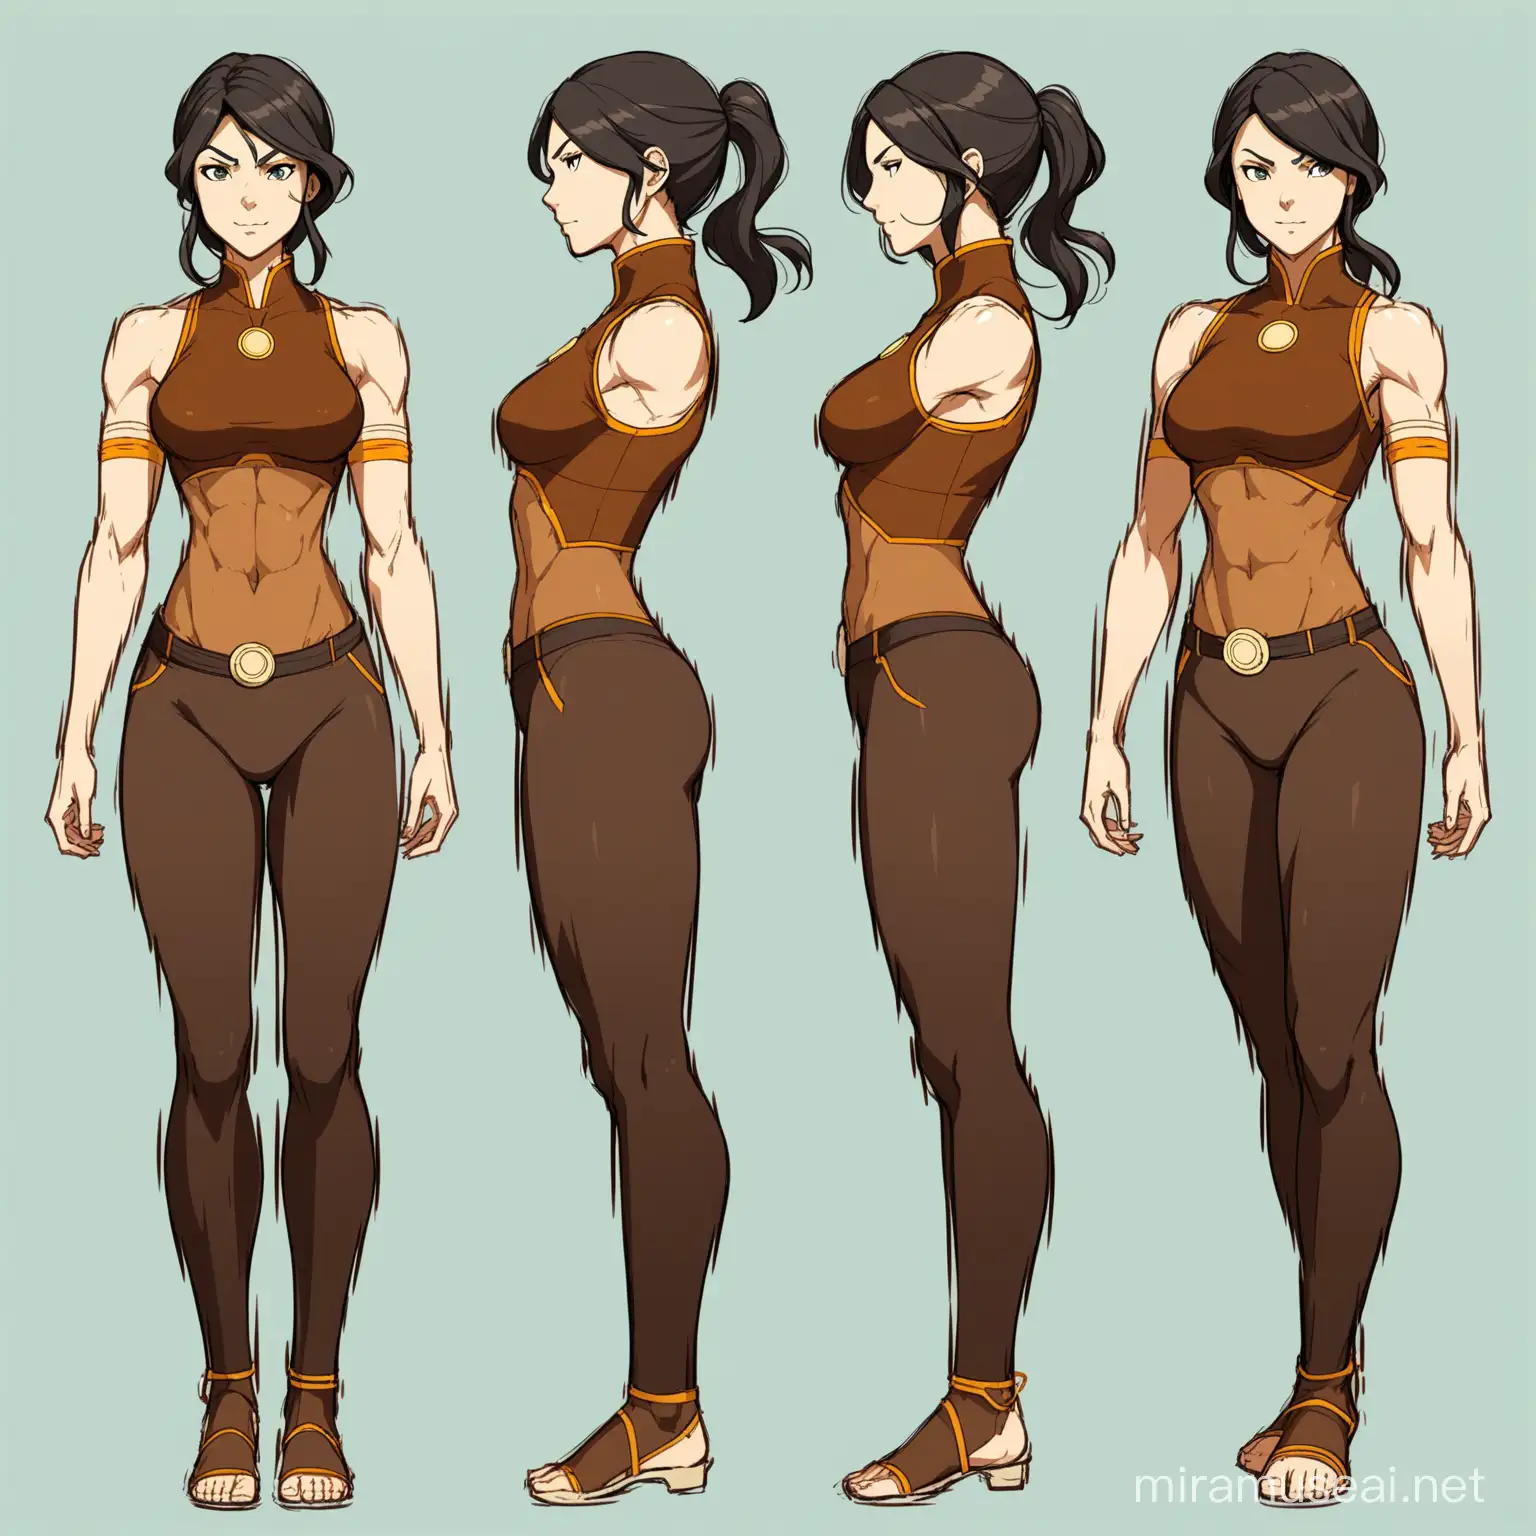 (multiple views full body upper body reference sheet:1) a female figure, tall, beautiful, toned body, slim waist, mature, playfull dynamic pose, in style of Legend of Korra, 4 poses